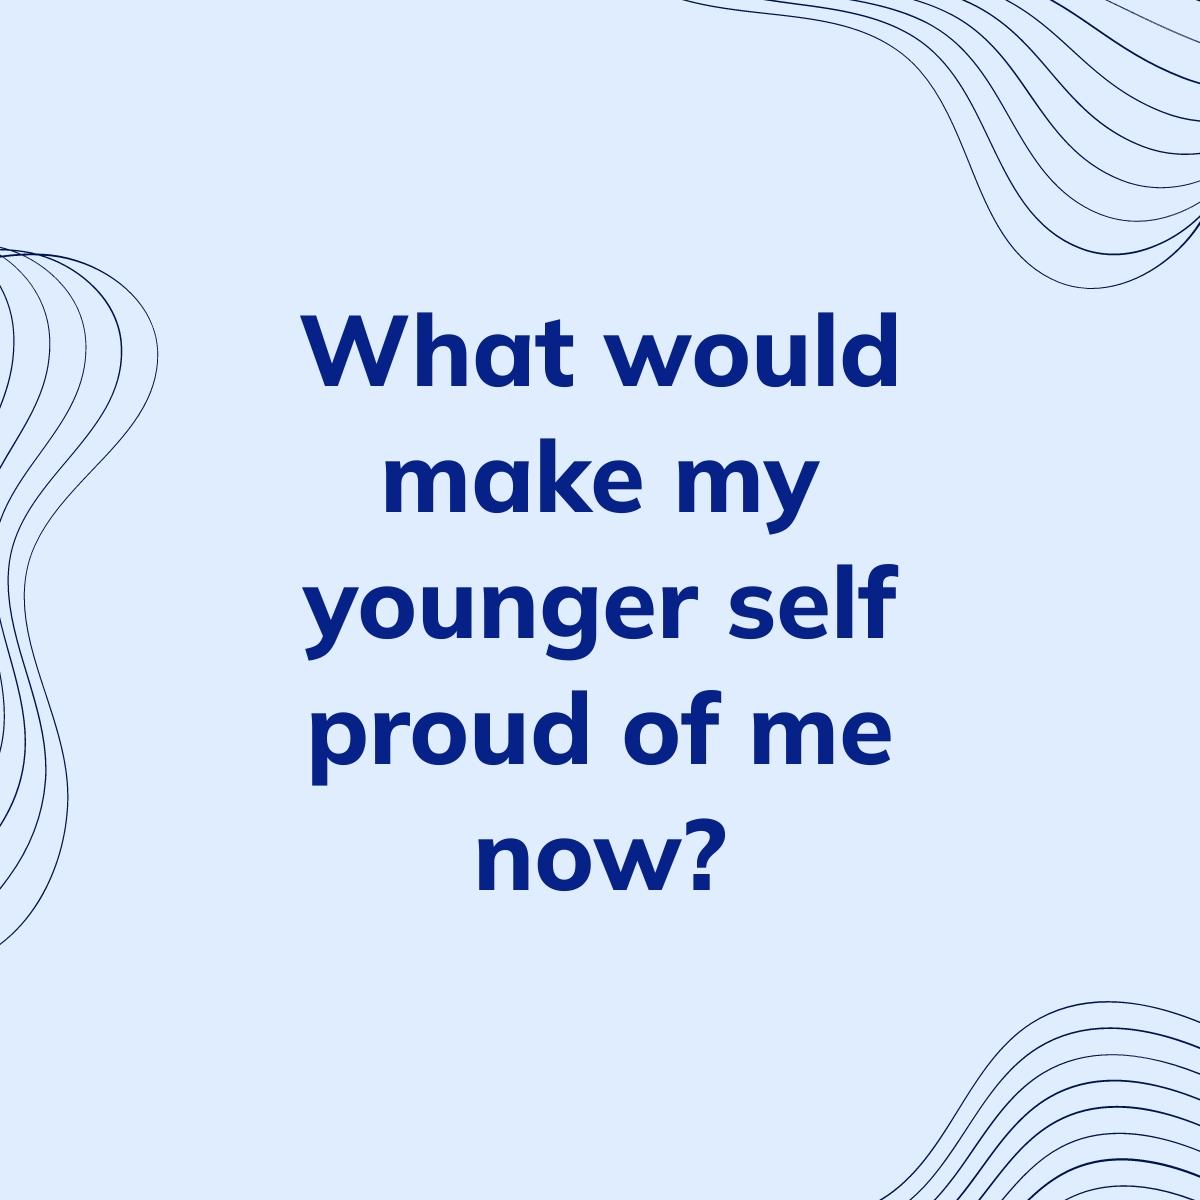 Journal Prompt: What would make my younger self proud of me now?